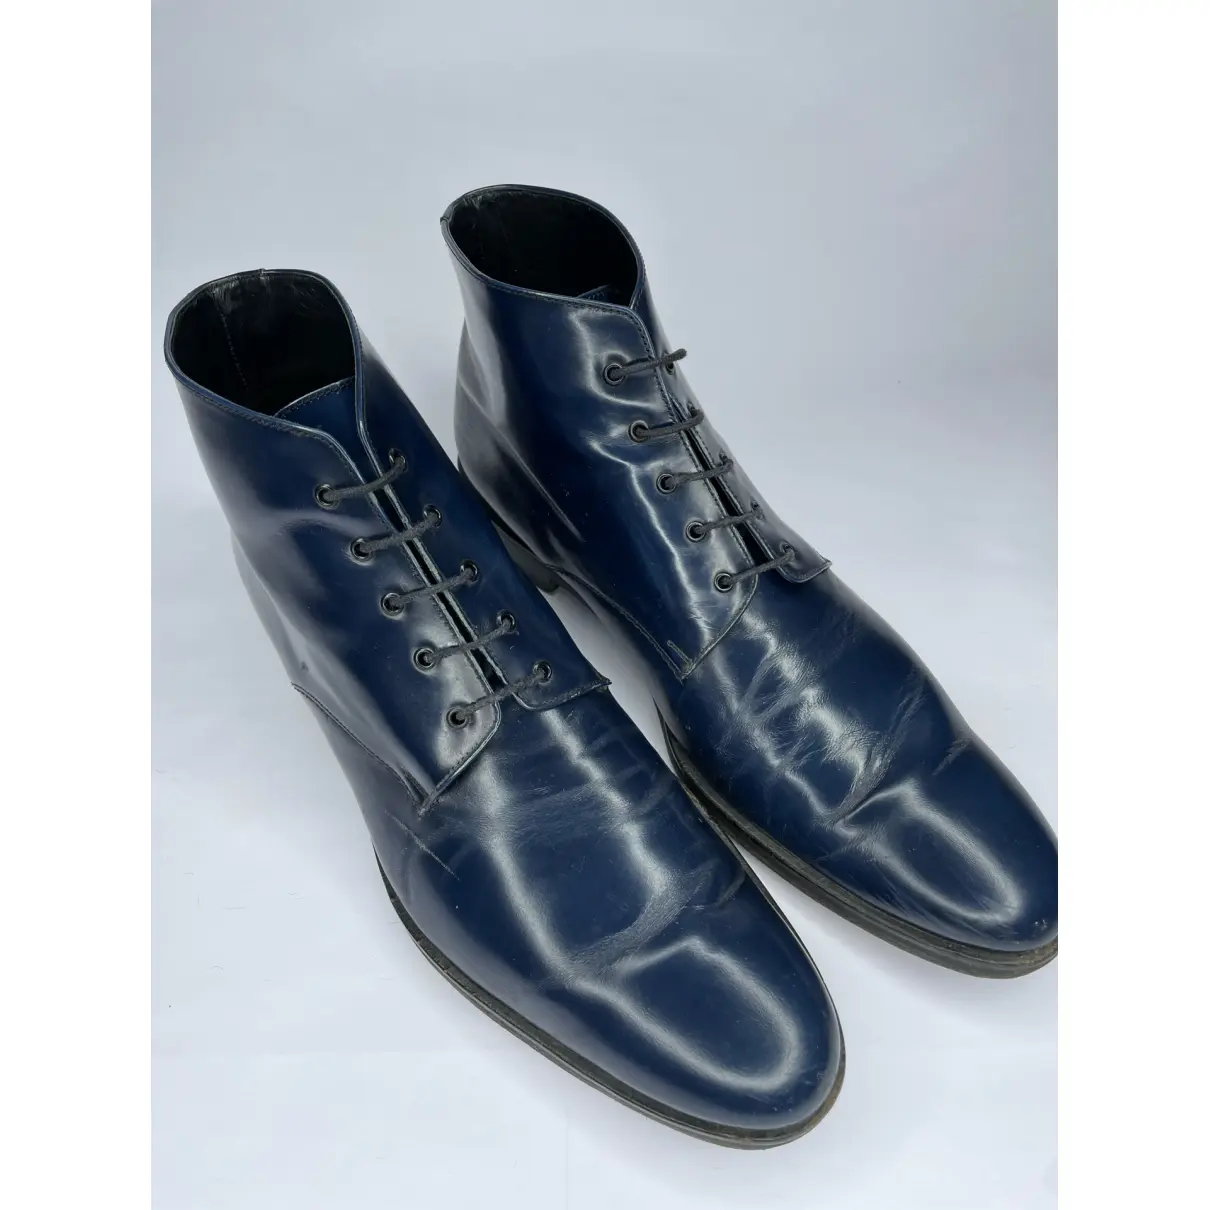 Buy Zegna Leather boots online